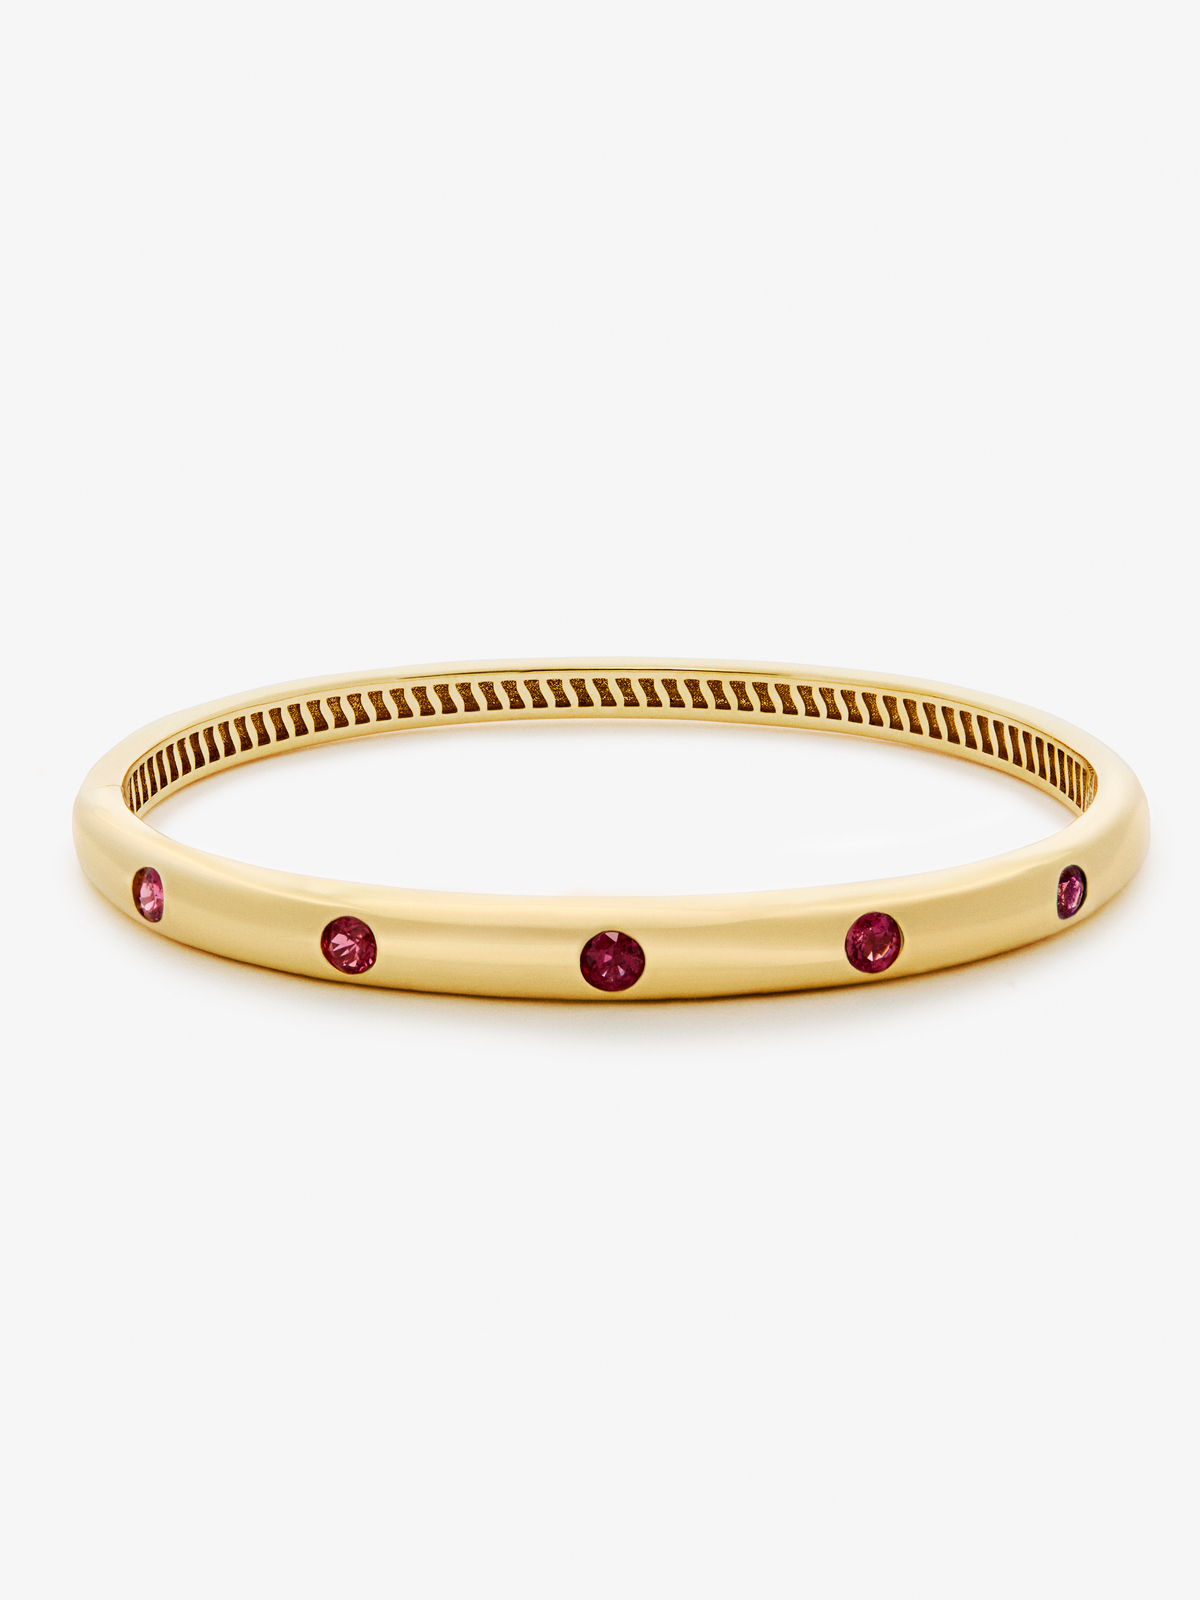 18K yellow gold bracelet with 1.2 ct brilliant cut rubies